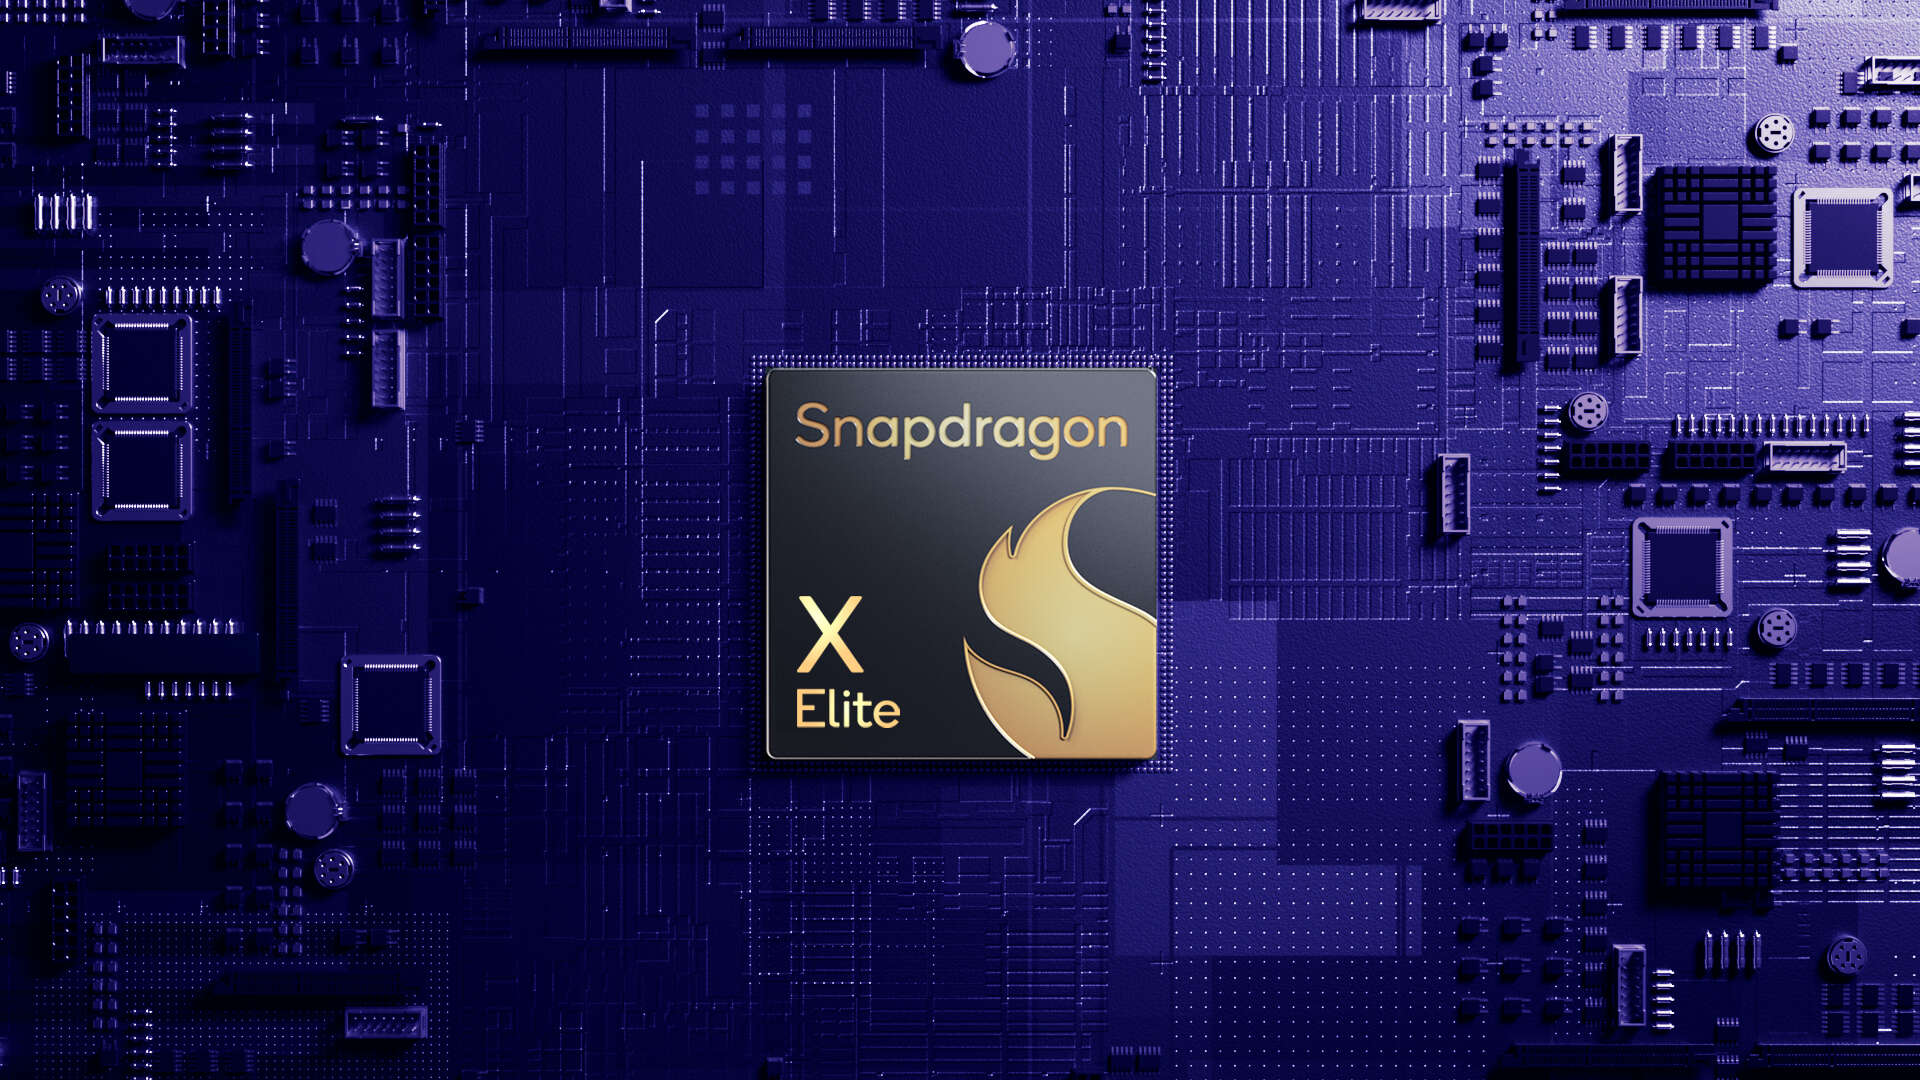 Featured image for The Snapdragon X Elite may be 21% faster than the Apple M3, claims Qualcomm